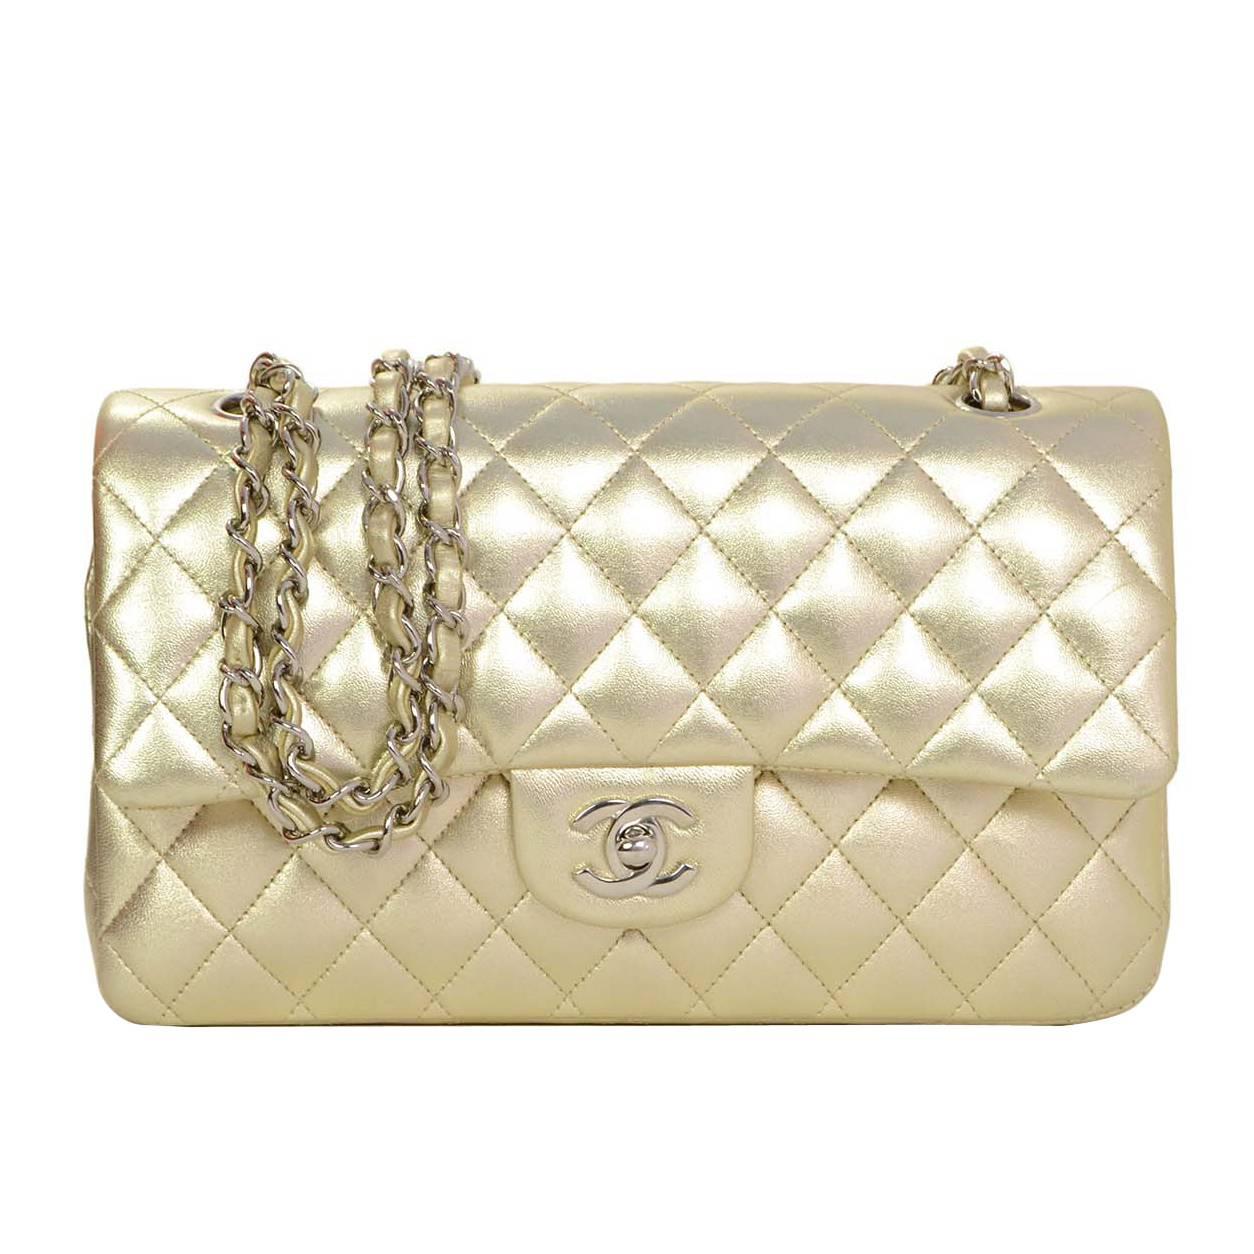 Chanel Gold Quilted Lambskin Medium 10" Double Flap Classic Bag with SHW